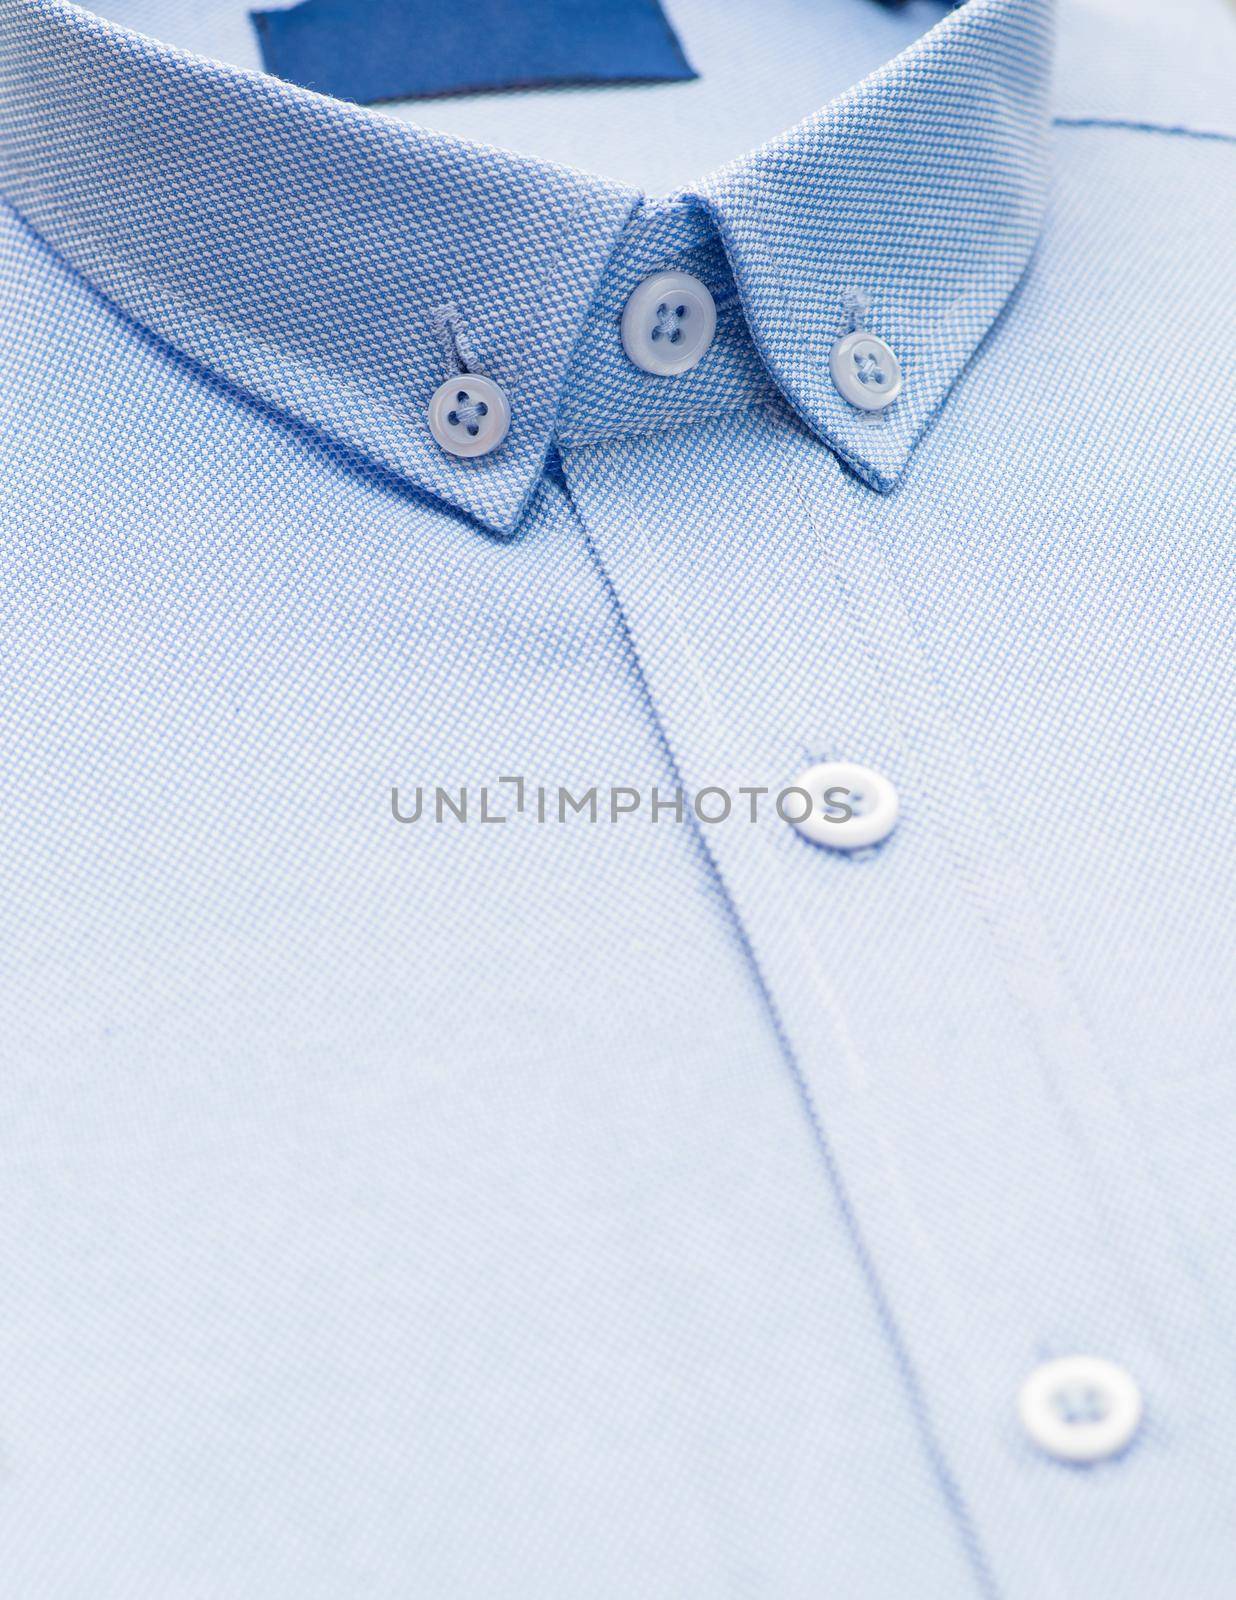 blue shirt with a focus on the collar and button, close-up